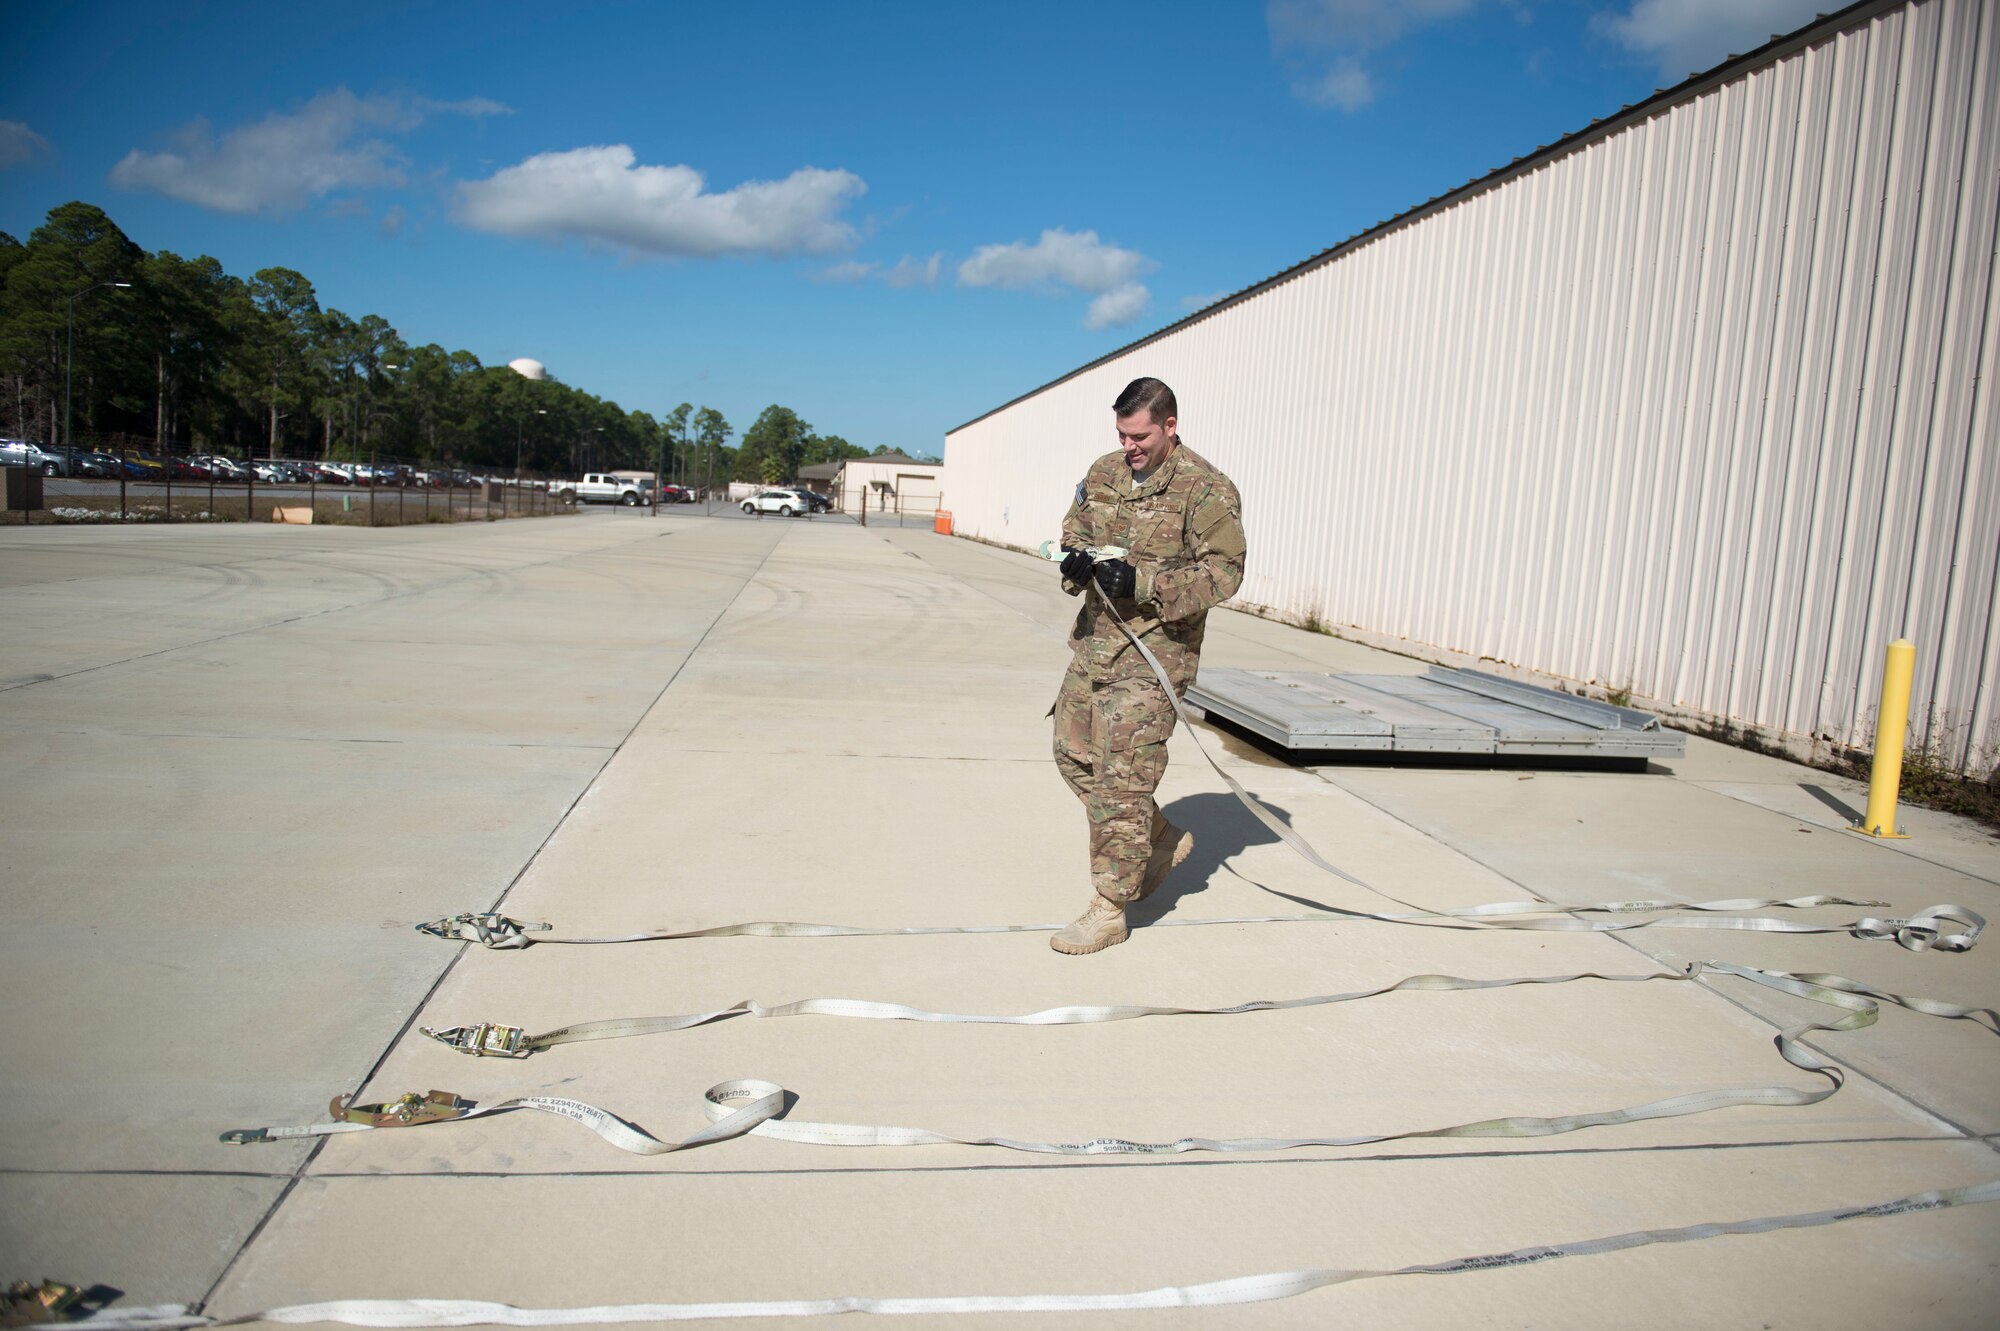 Tech. Sgt. David Sigers, an aircrew flight equipment craftsman with the 15th Special Operations Squadron, separates straps during pallet build-up training at Hurlburt Field, Fla., Dec. 12, 2016. AFE Air Commandos were trained to properly weigh and document vehicles for cargo loading. The training ensures Air Commandos are ready to execute global special operations. (U.S. Air Force photo by Senior Airman Krystal M. Garrett)